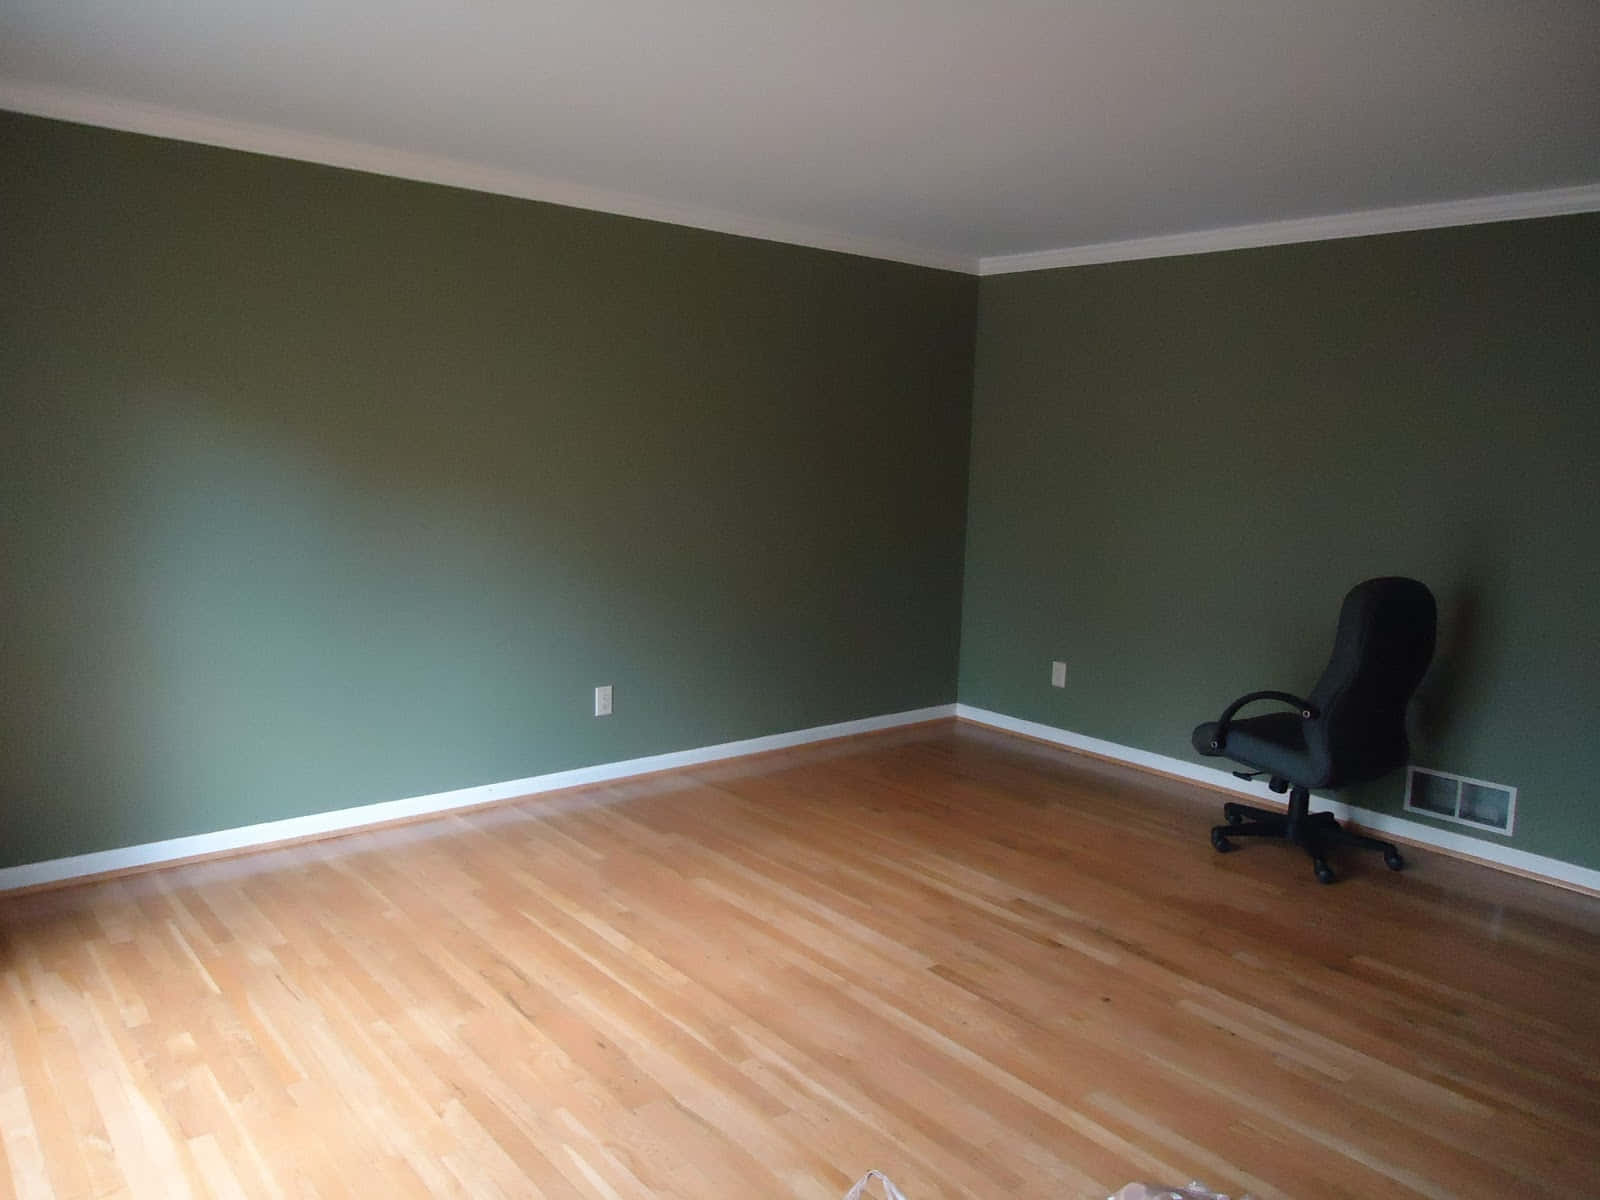 A Room With Green Walls And Hardwood Floors